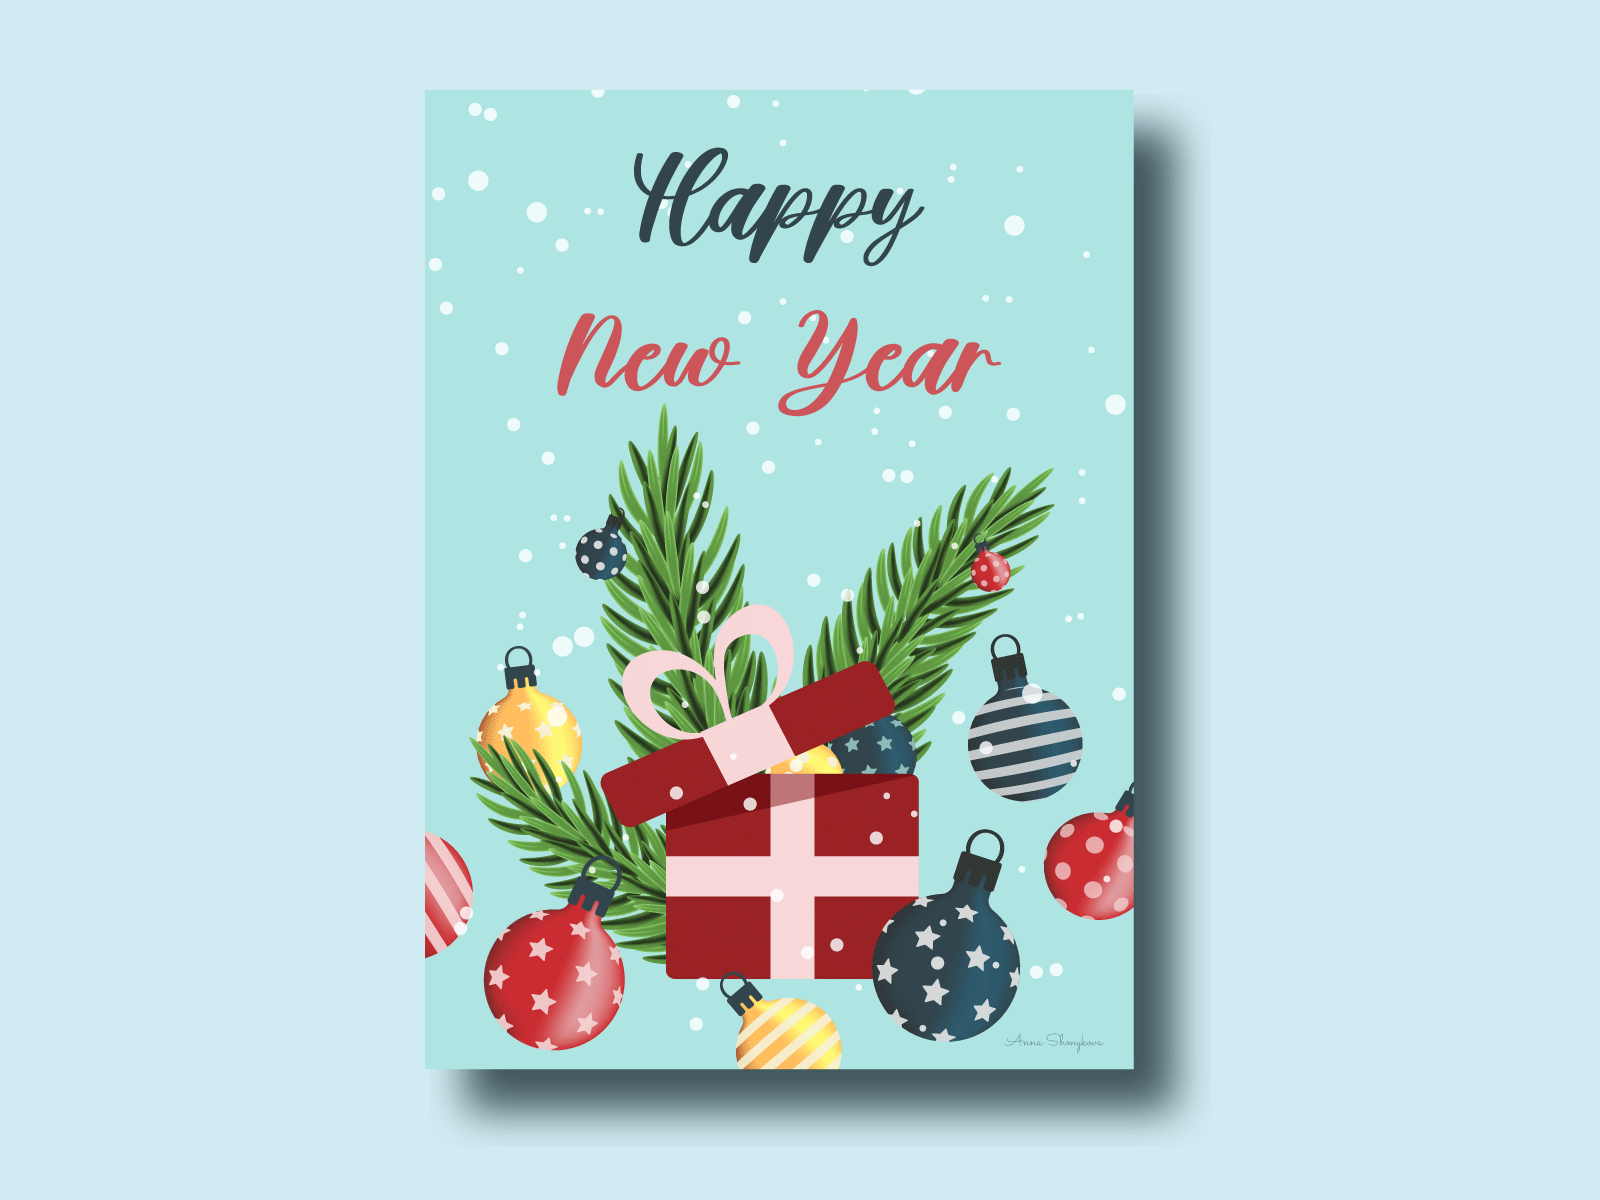 Graphic design of a New Year postcard